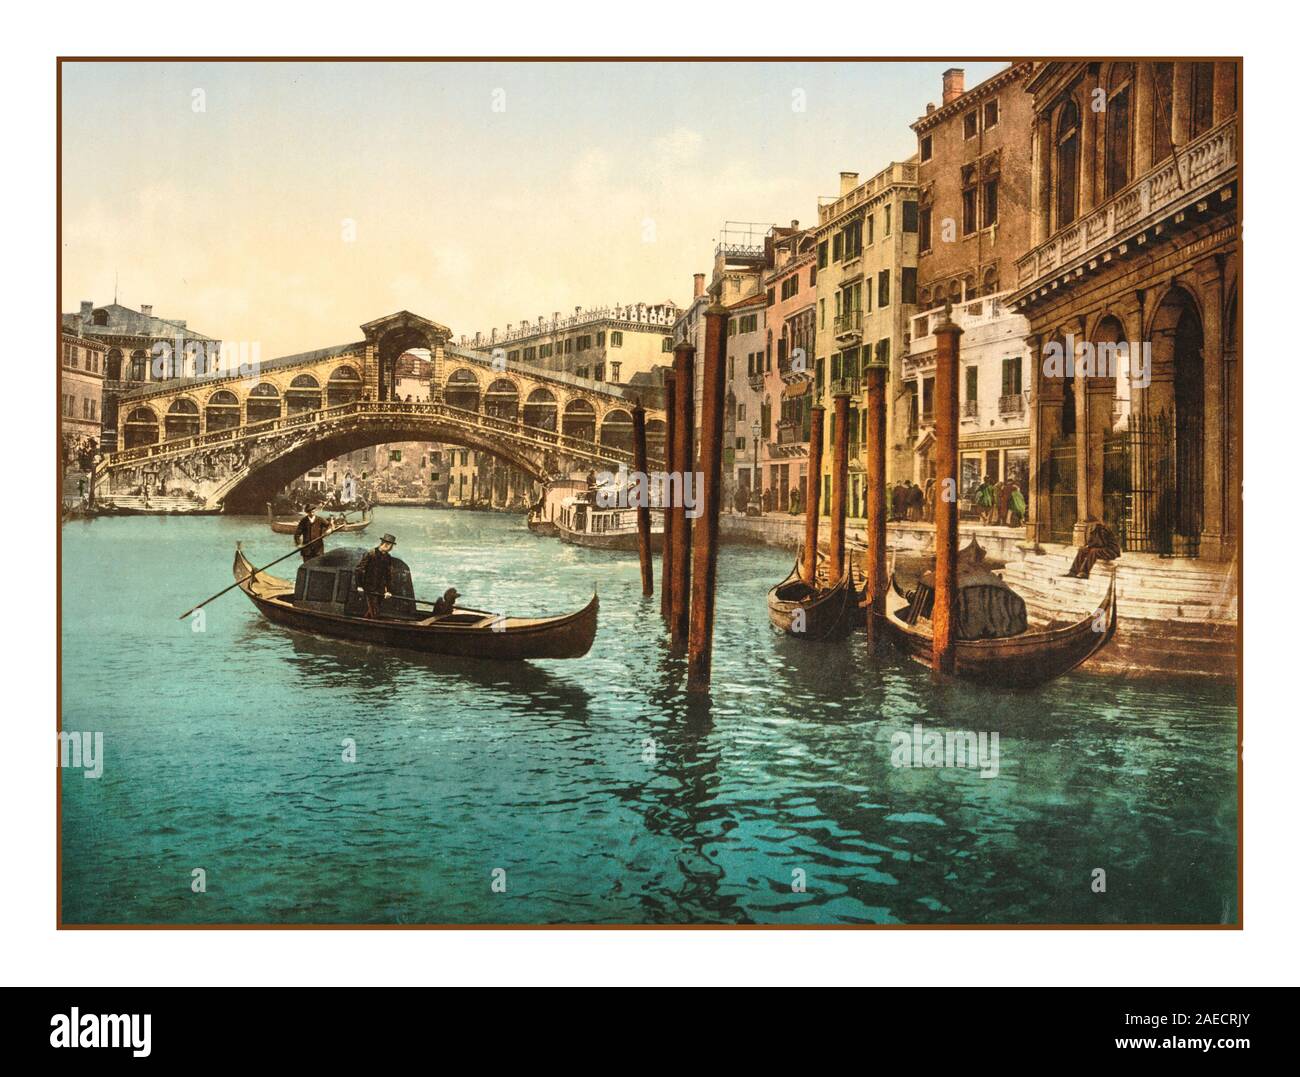 VENICE RIALTO BRIDGE VINTAGE OLD PHOTOCHROM 1890-1900’s Historic Vintage old image of The Rialto Bridge, Venice, Italy 1890 Using post colouring technique via transfer onto lithographic printing plates from Black and White negative images, producing pleasing evocative creative artwork images The Rialto Bridge, Venice, Italy 1890 Stock Photo